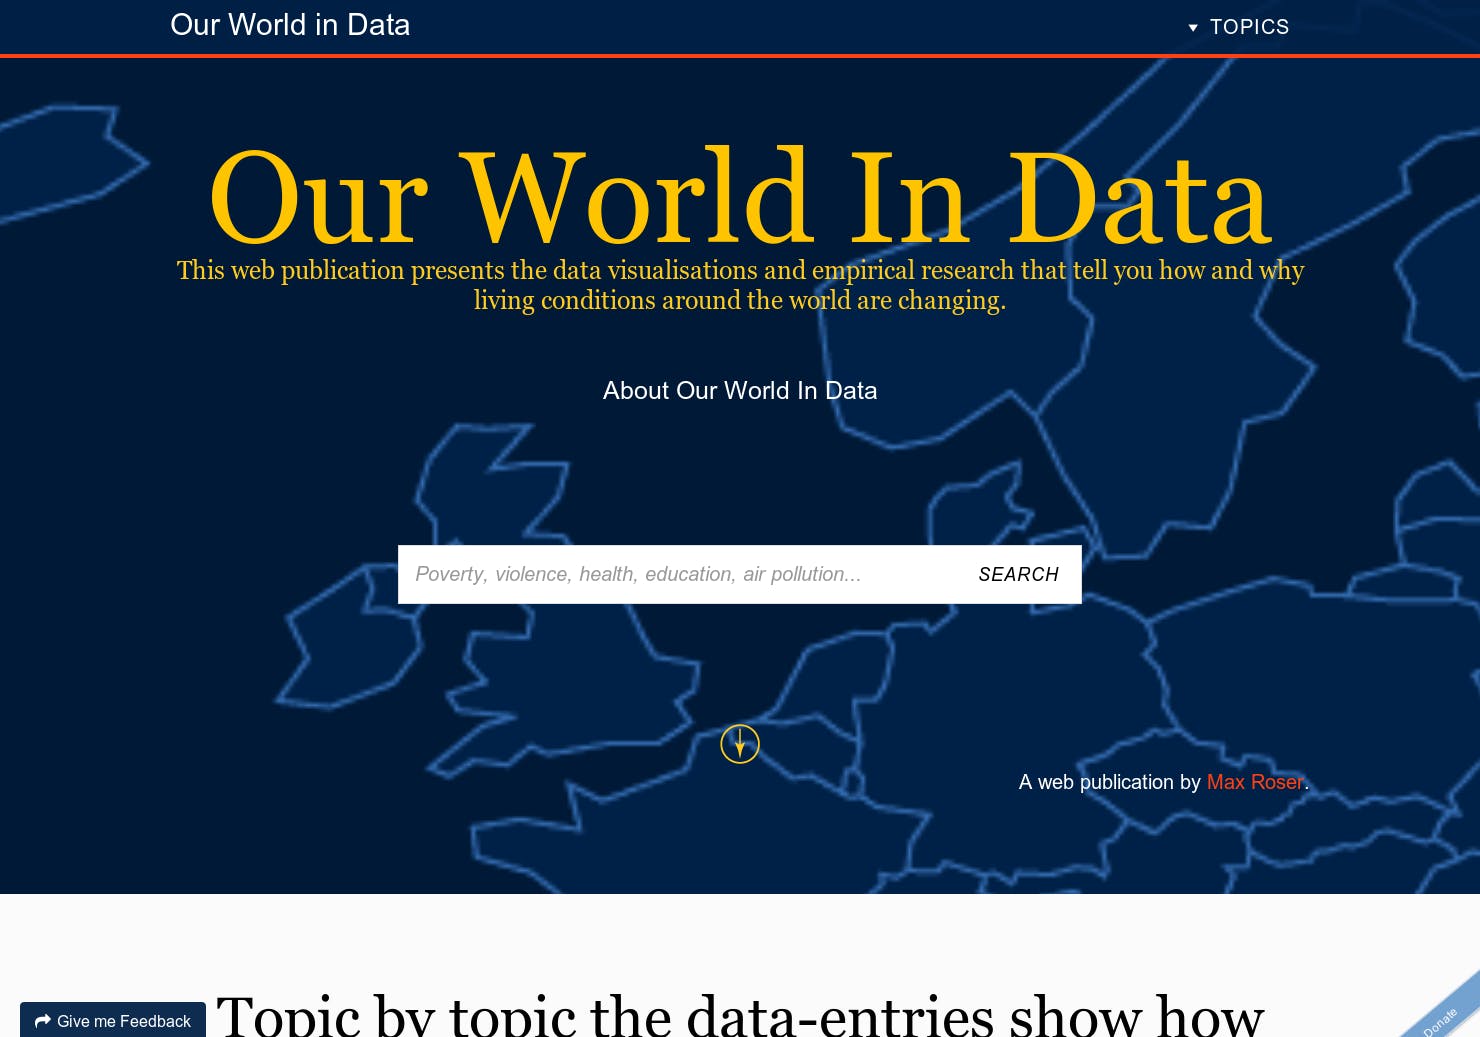 Our World In Data media 3